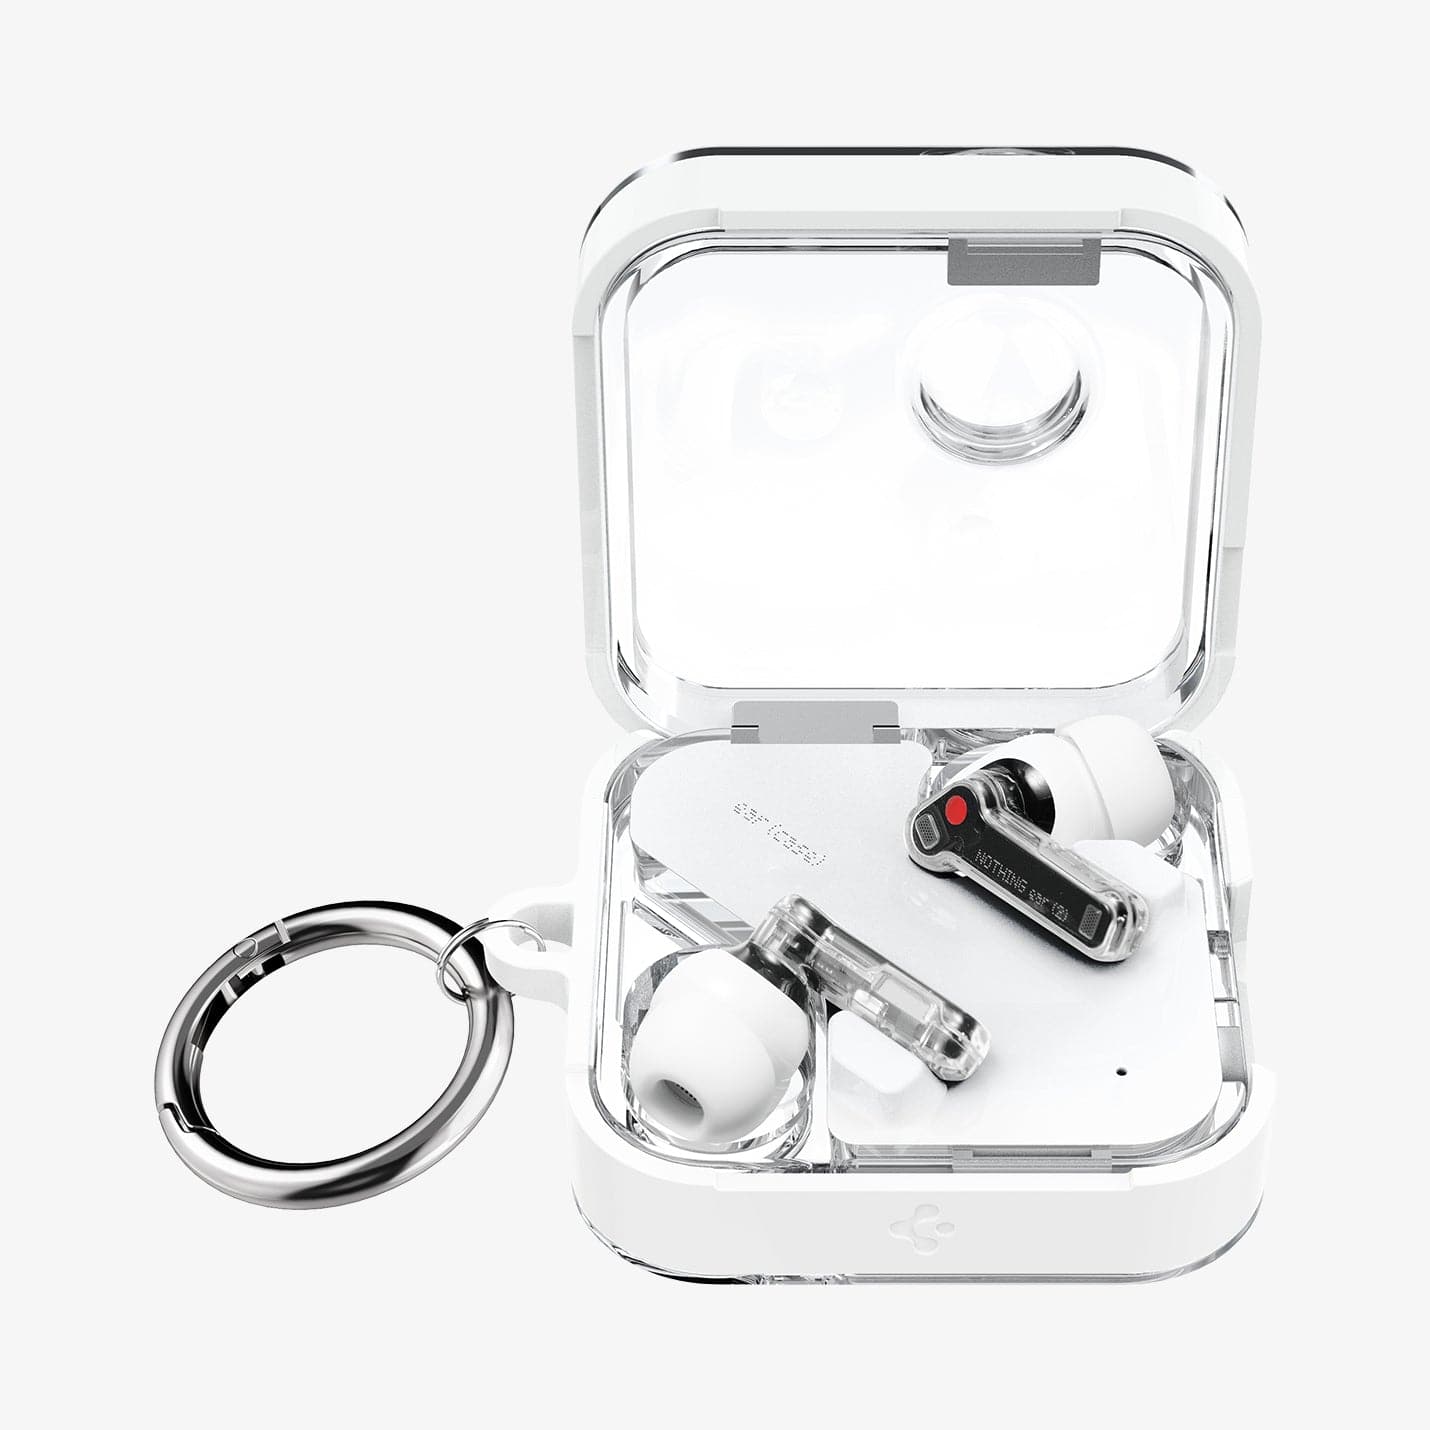 ACS06434 - Nothing Ear (2) Case Ultra Hybrid in jet white showing the inside with earbuds, front and carabiner